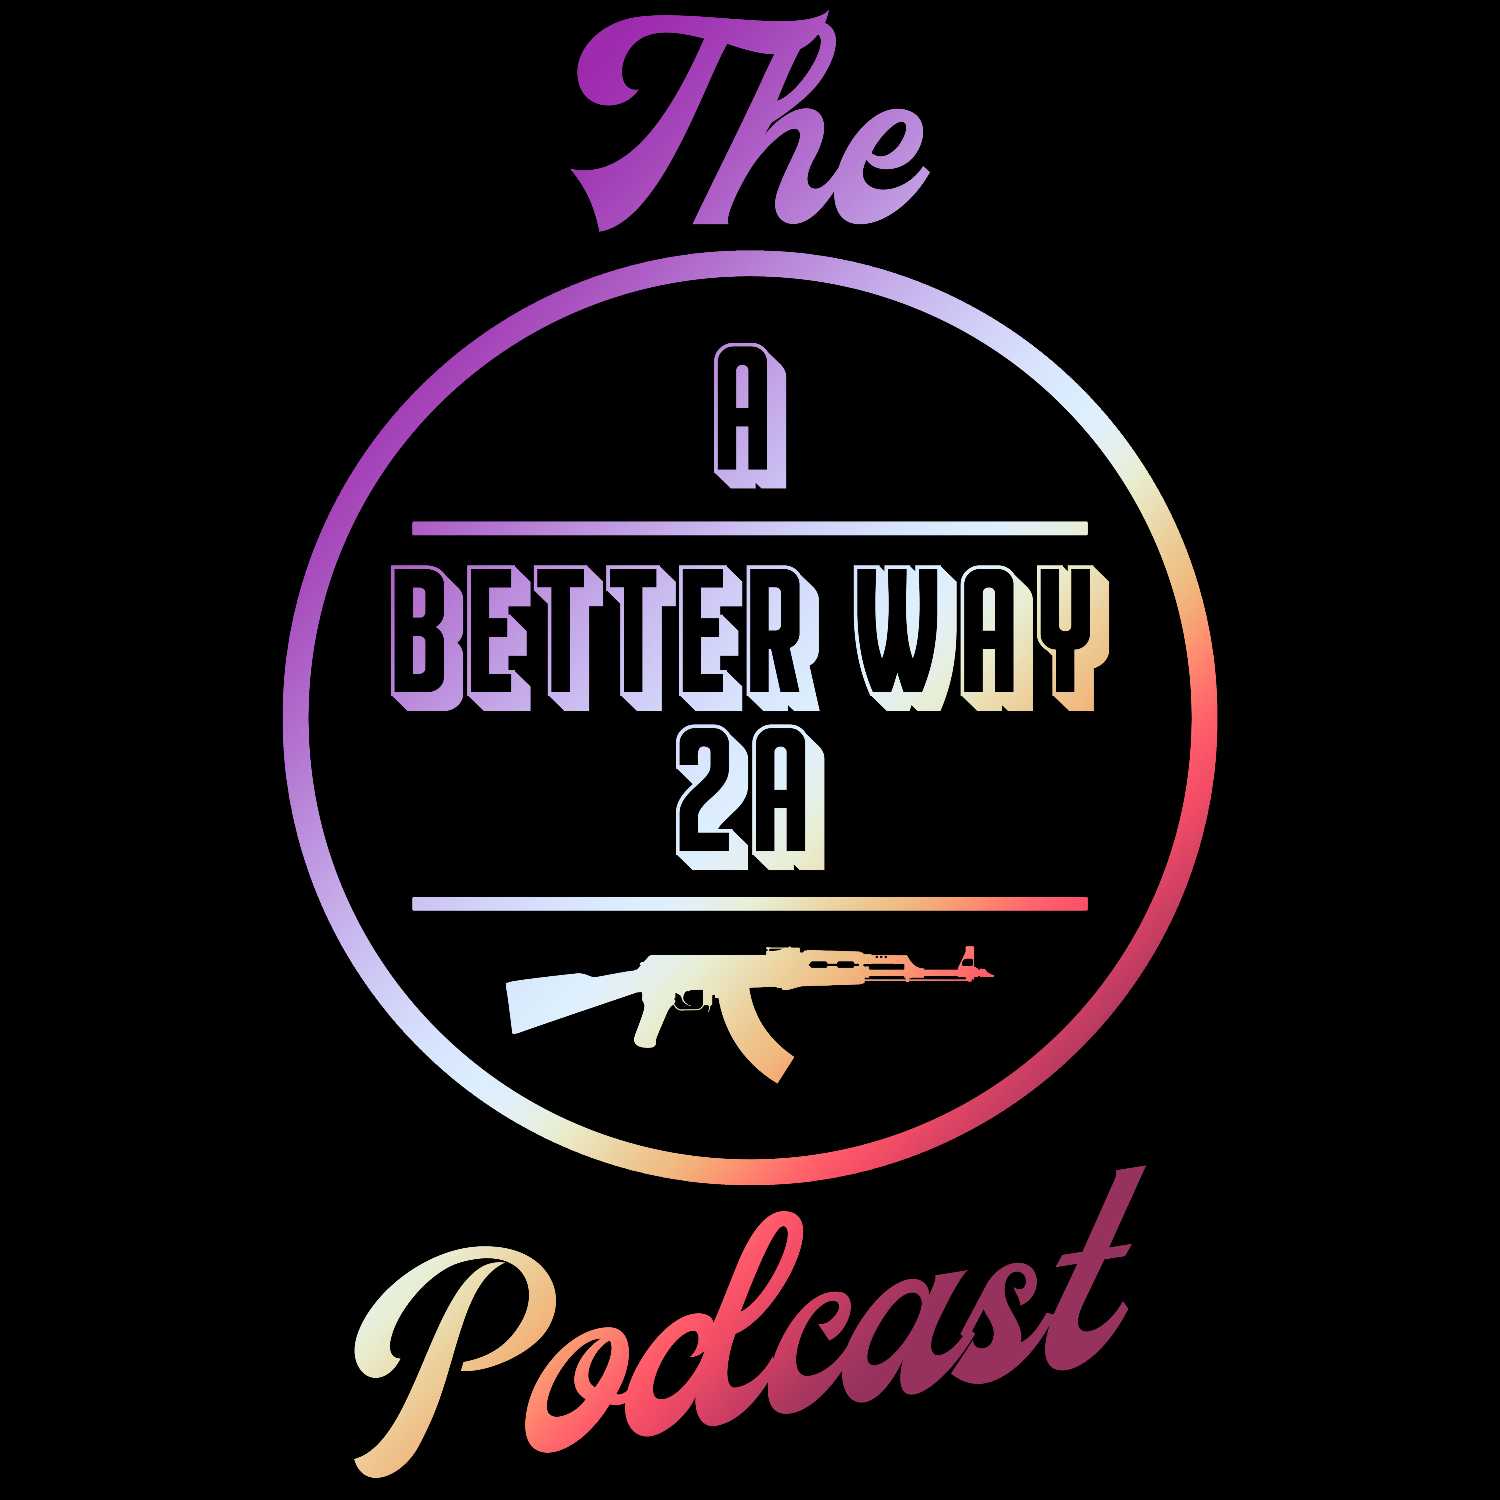 Episode 29 - Domestic Violence, Gun Ownership, and Keeping Your Home Safe, with Emily Wilder